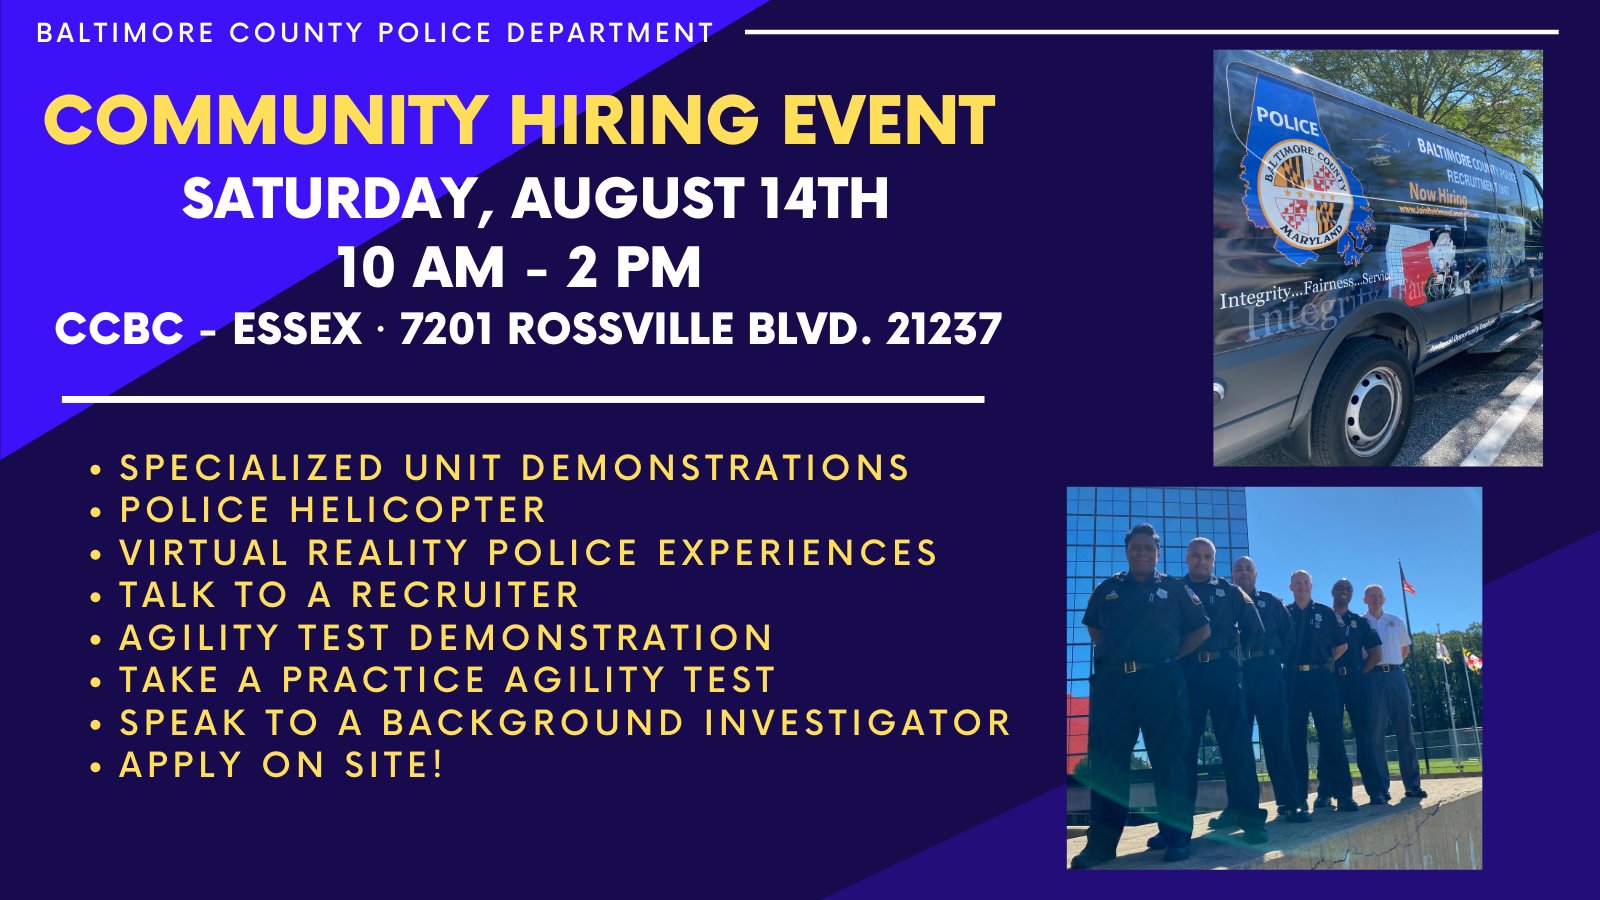 County Police to Hold Hiring Event at CCBC Essex